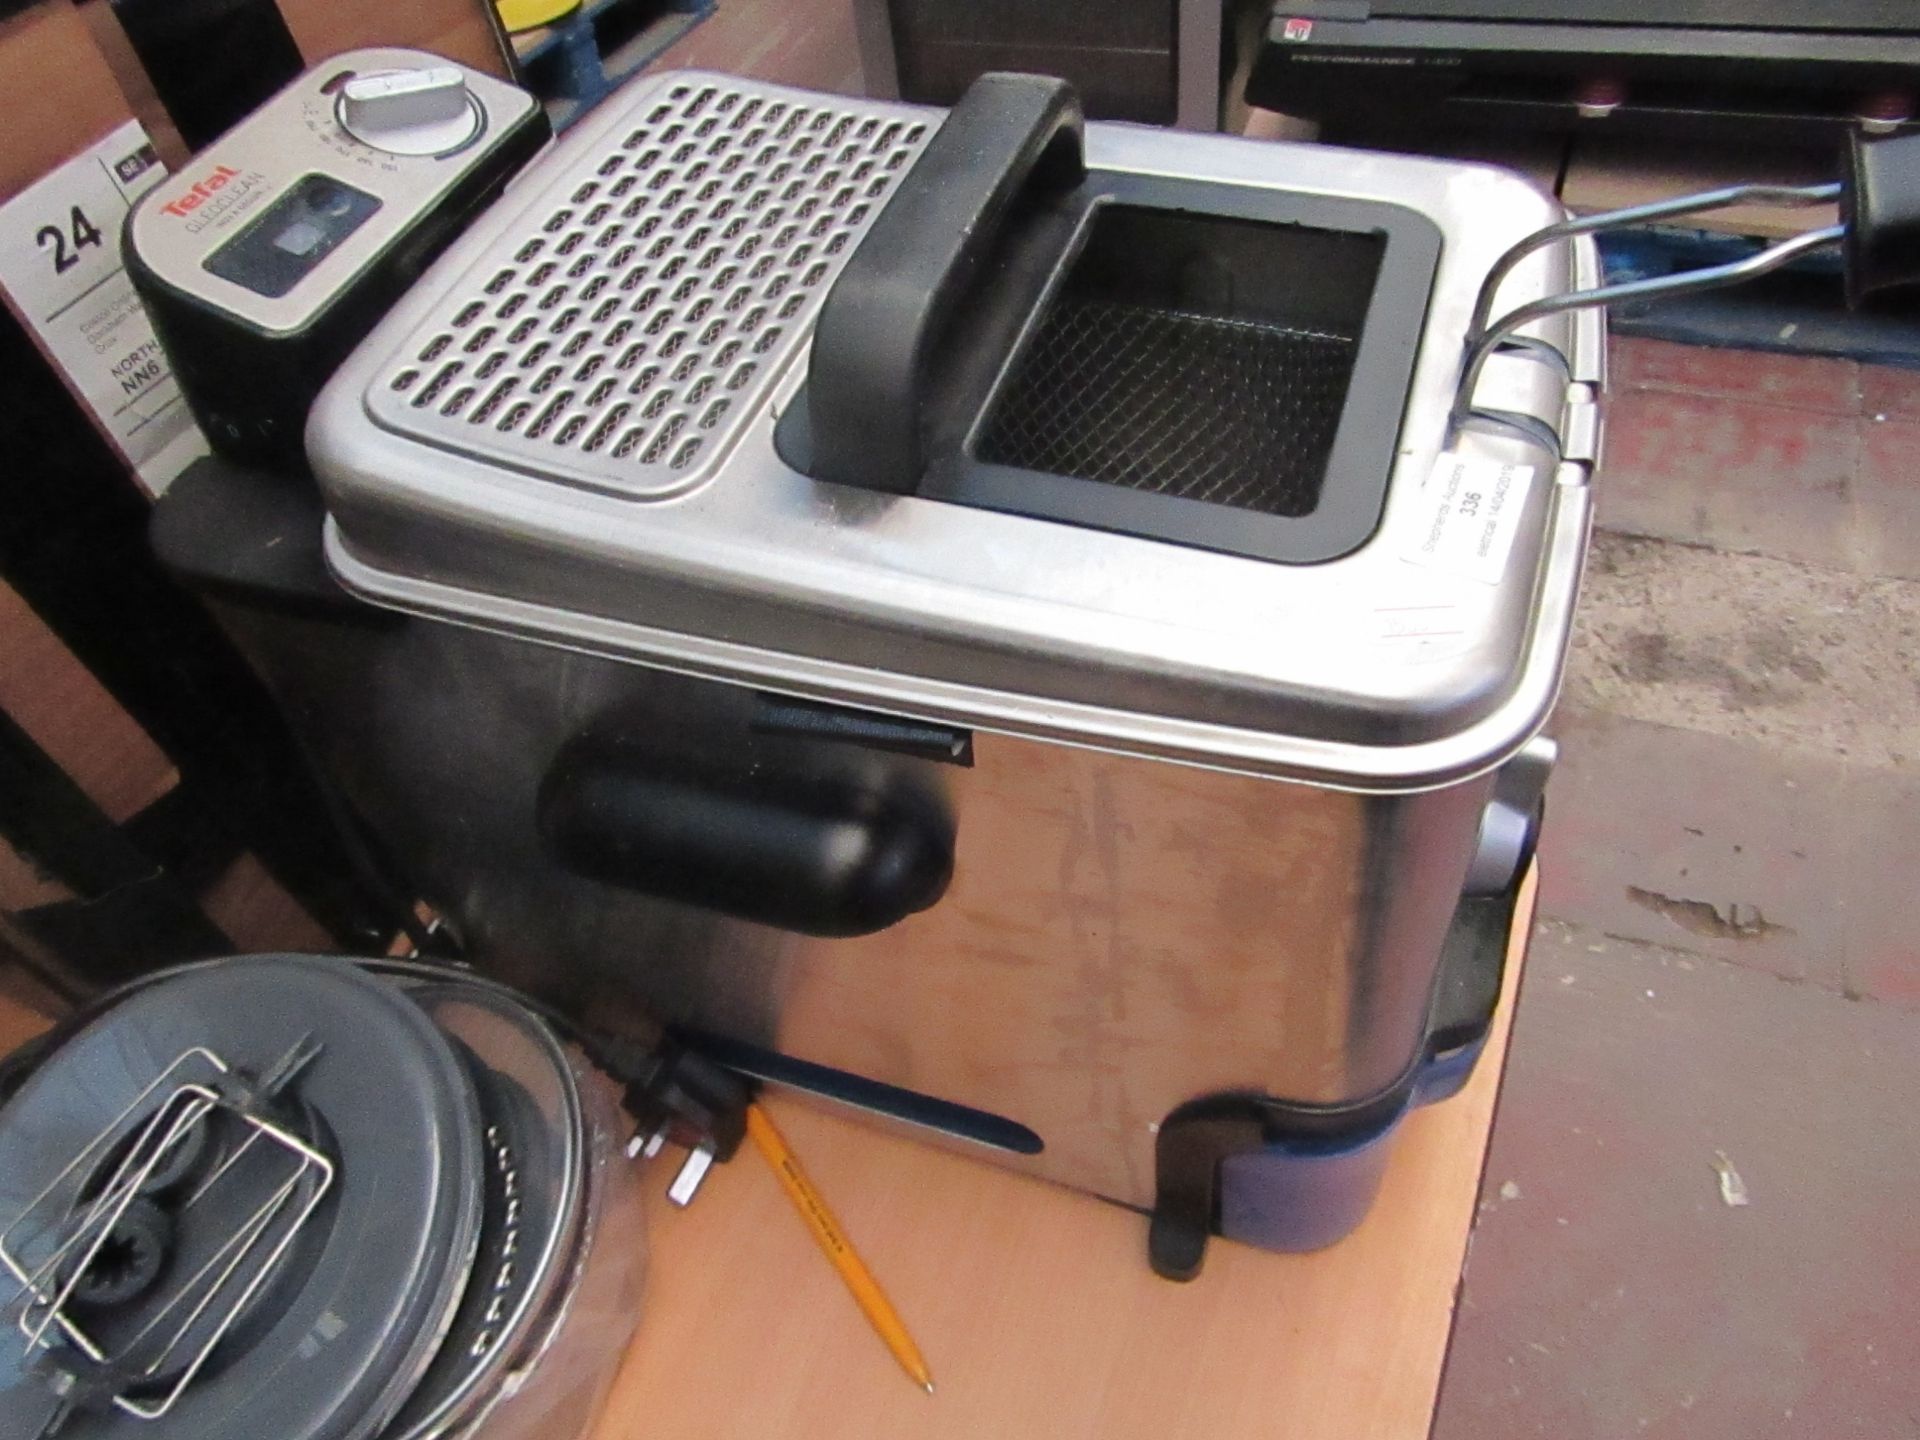 Tefal OLEO Clean fryer, tested working but glass has smashed.